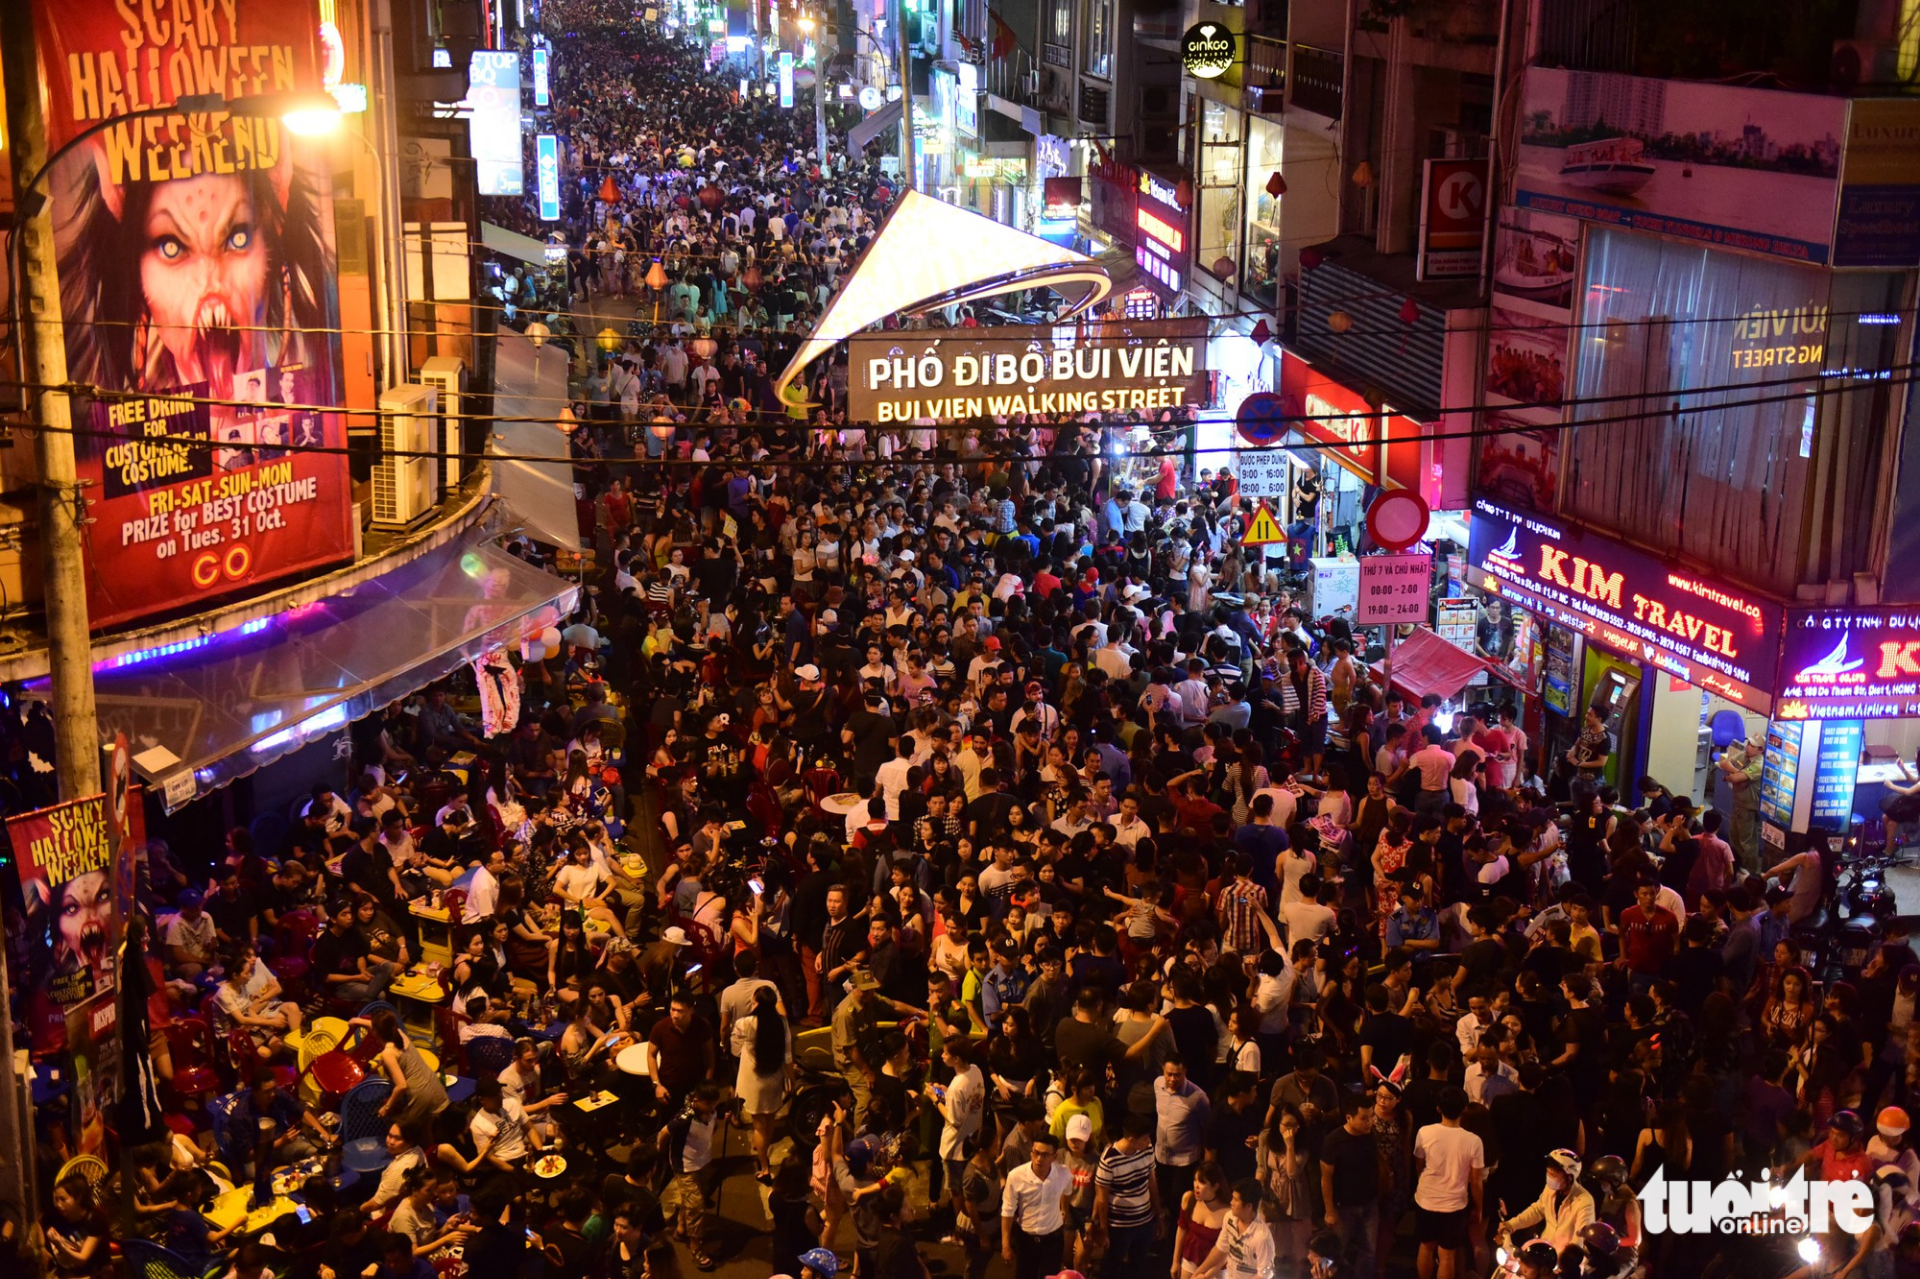 The crowded Bui Vien Street is seen from above.